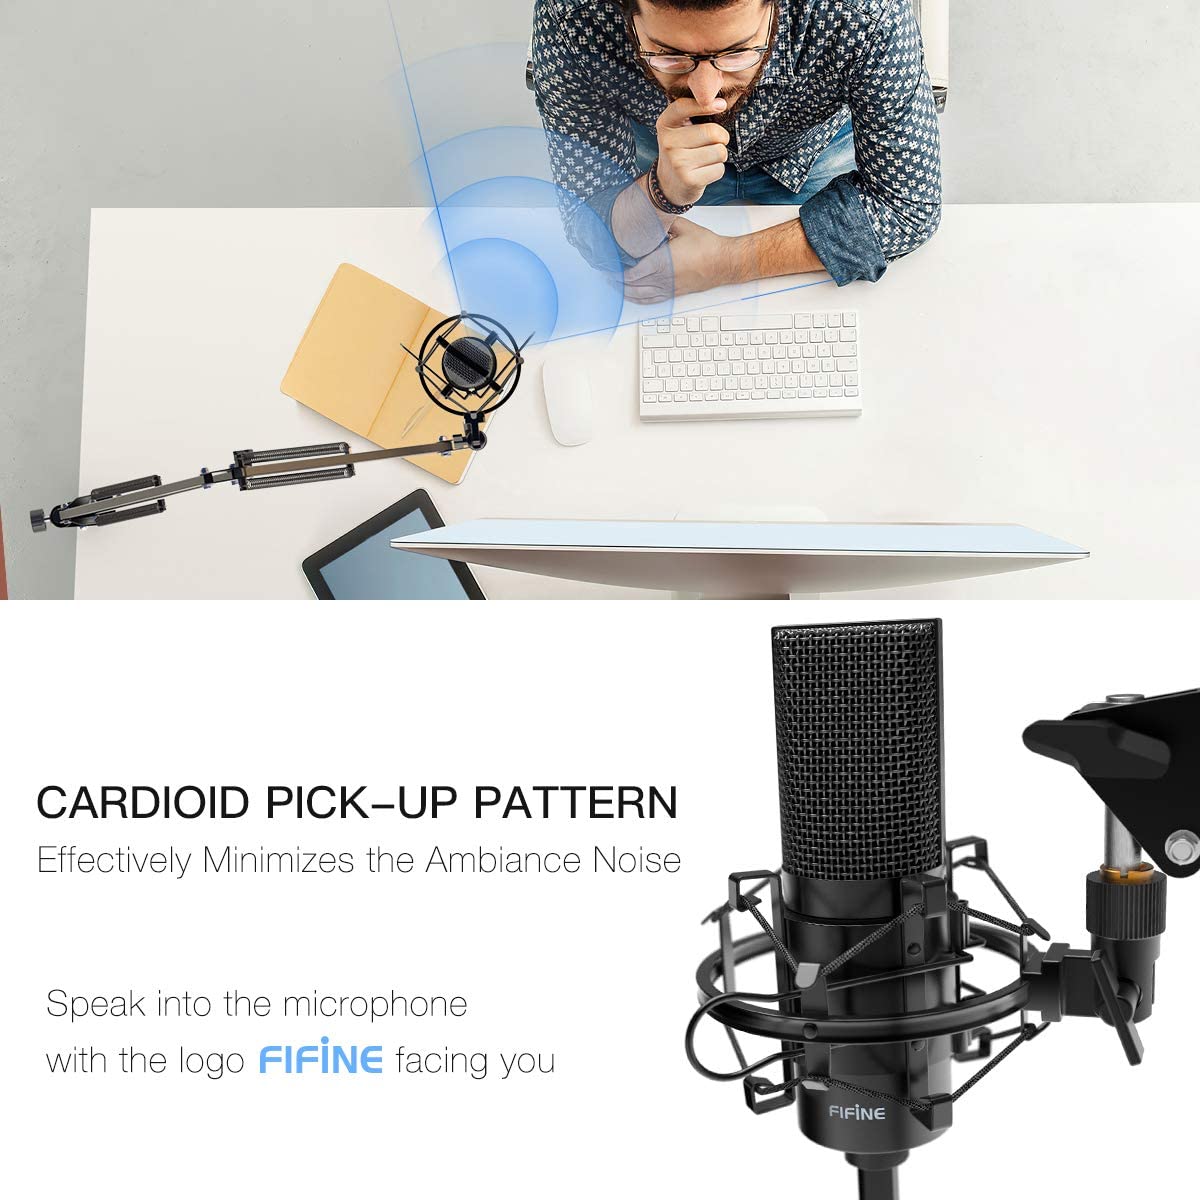 FIFINE K780 USB Streaming Microphone Kit, Condenser Studio Mic with Arm Stand & Pop Filter for Podcast Vocal Recording Singing YouTube Gaming Voice Over, Directional Computer Mic for PC iMac Laptop